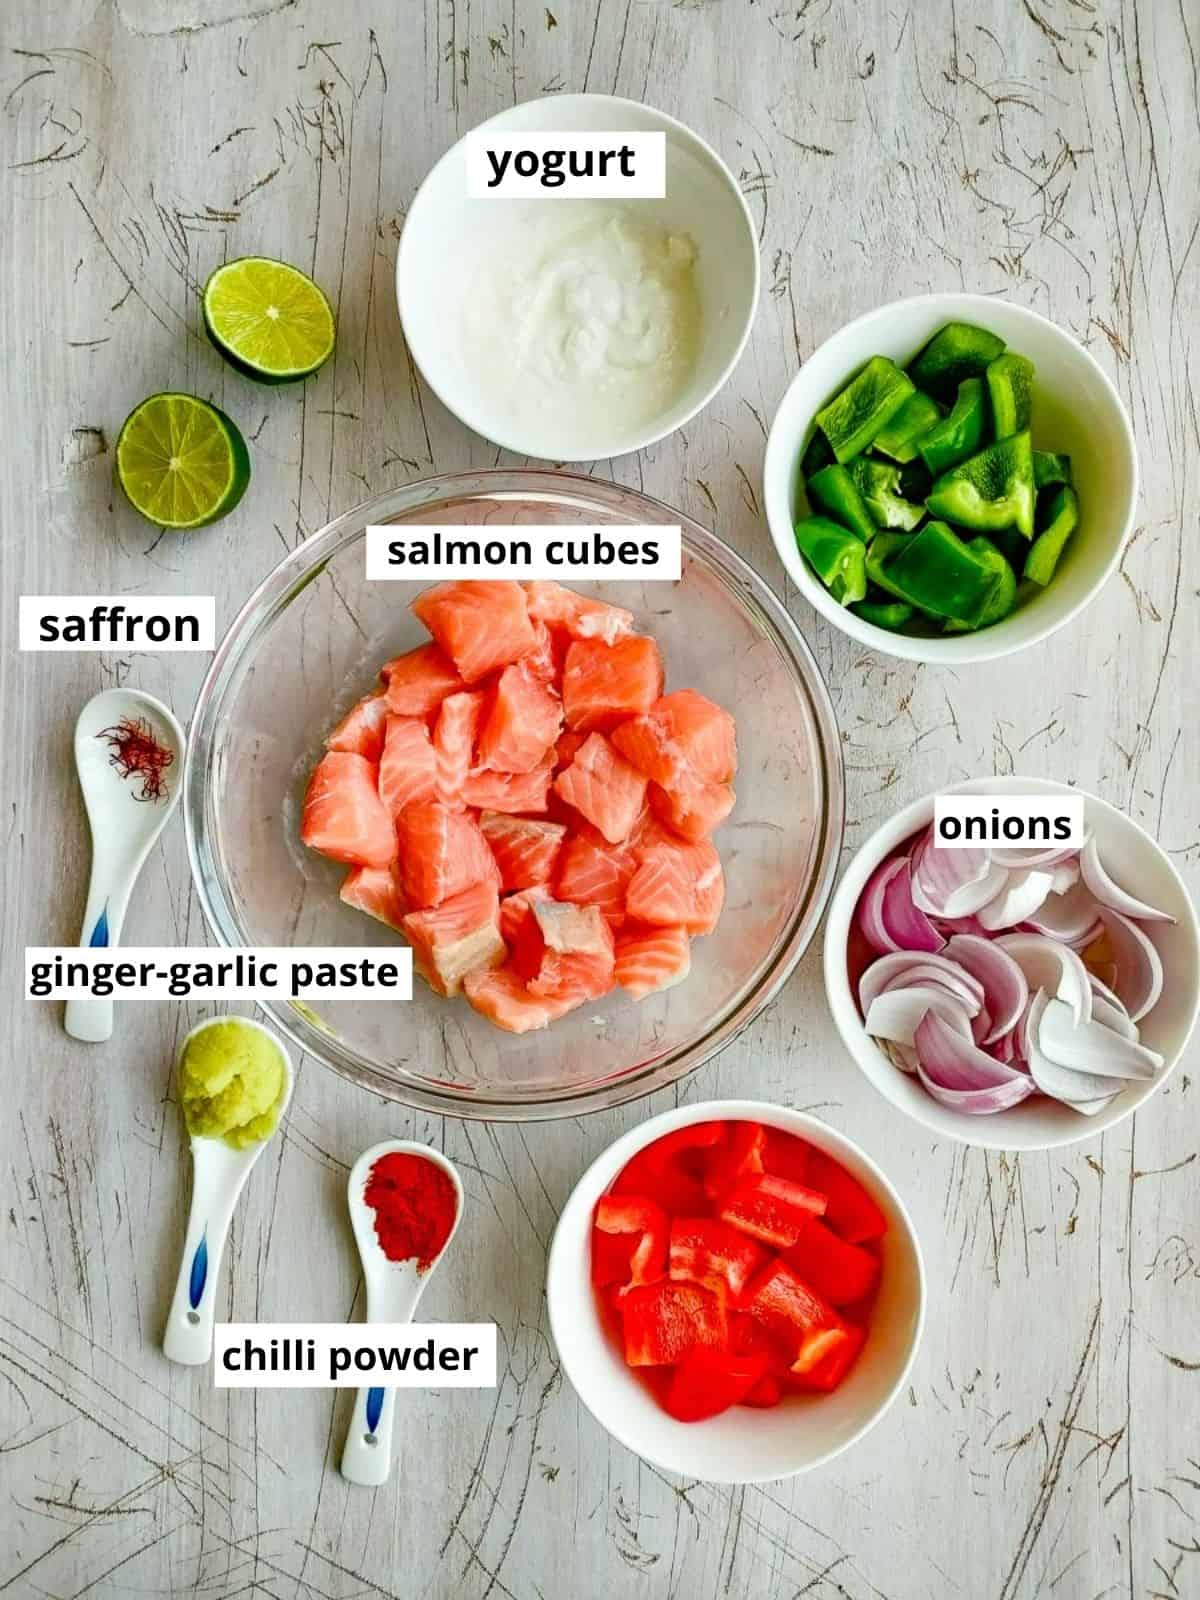 Labelled ingredients for saffron salmon kebabs in oven.